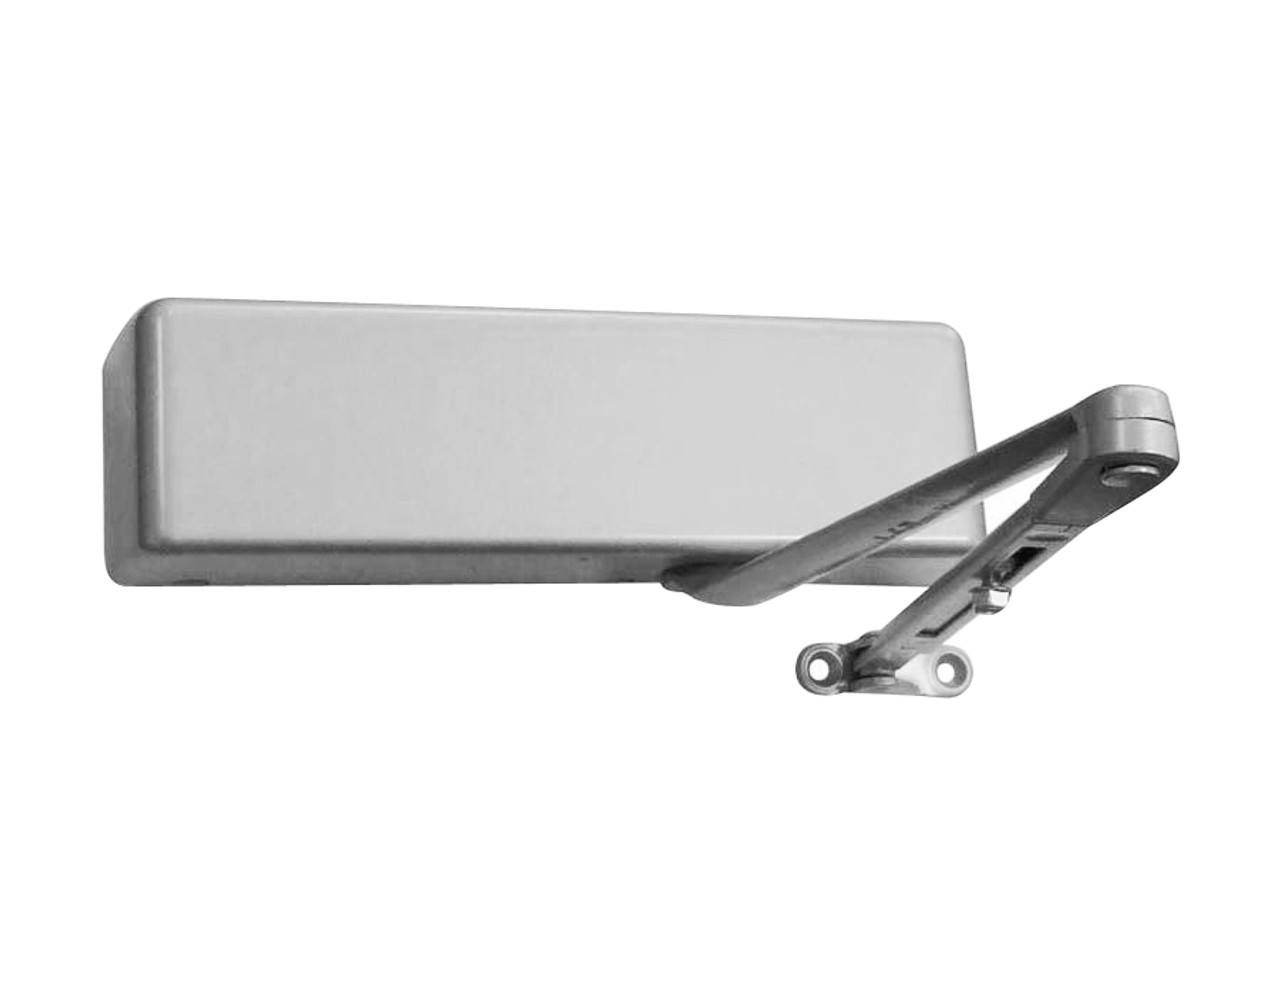 4021-LONG-LH-US26 LCN Door Closer with Long Arm in Bright Chrome Finish